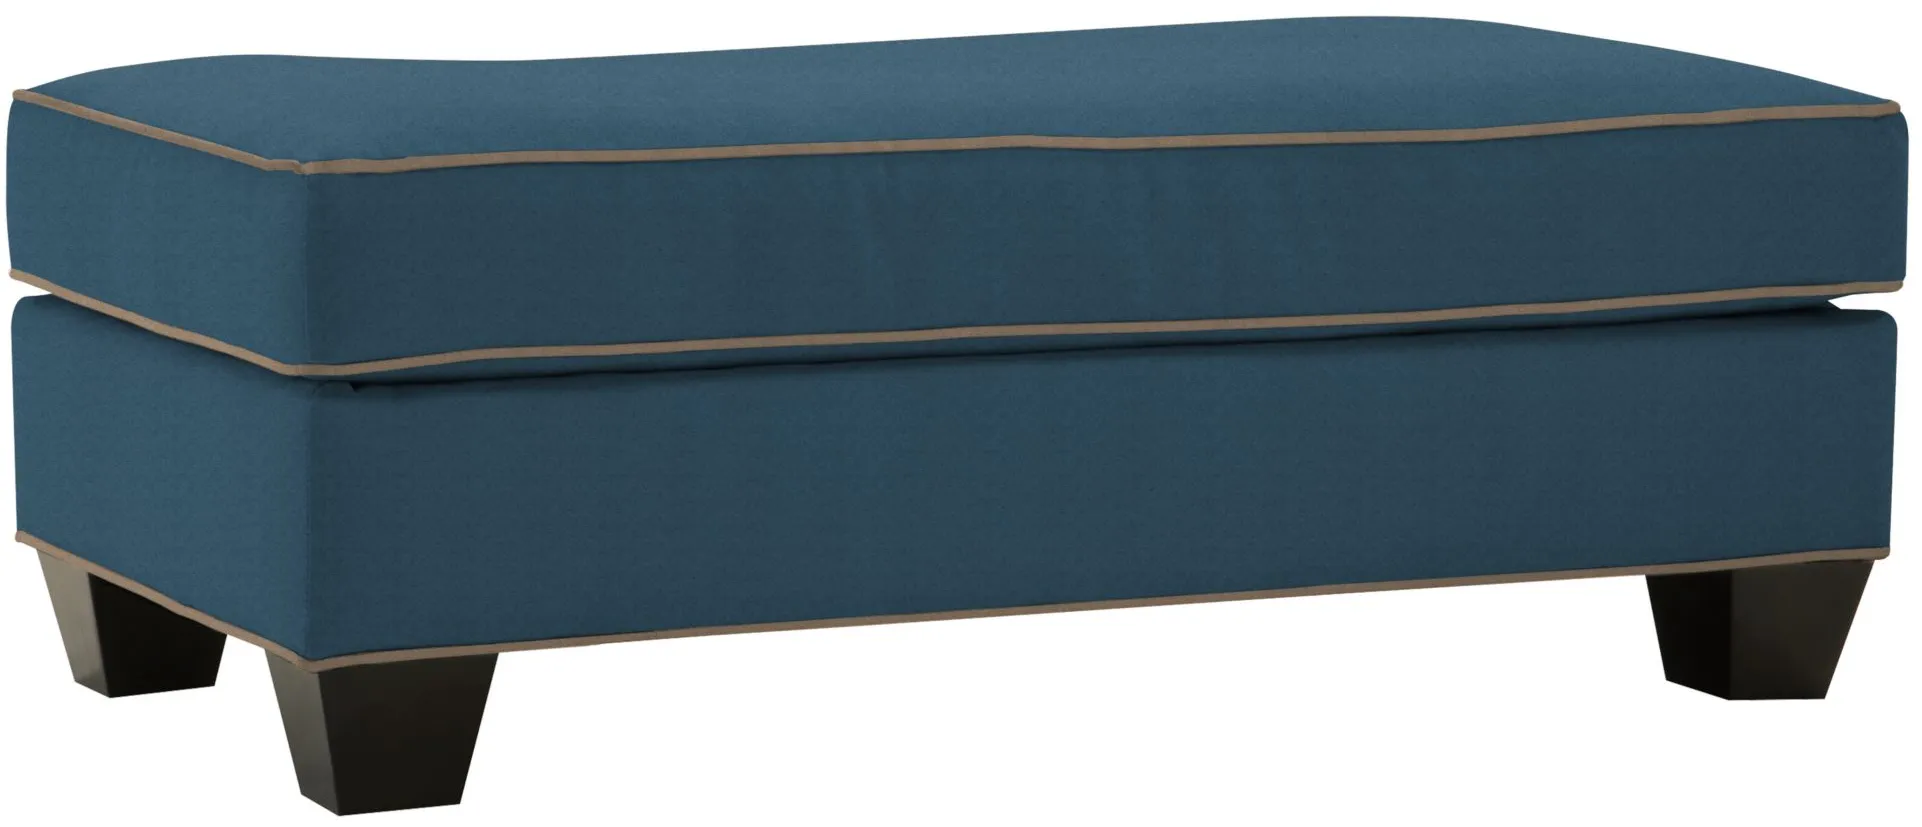 Briarwood Chair-and-a-Half Ottoman in Suede So Soft Indigo/Mineral by H.M. Richards